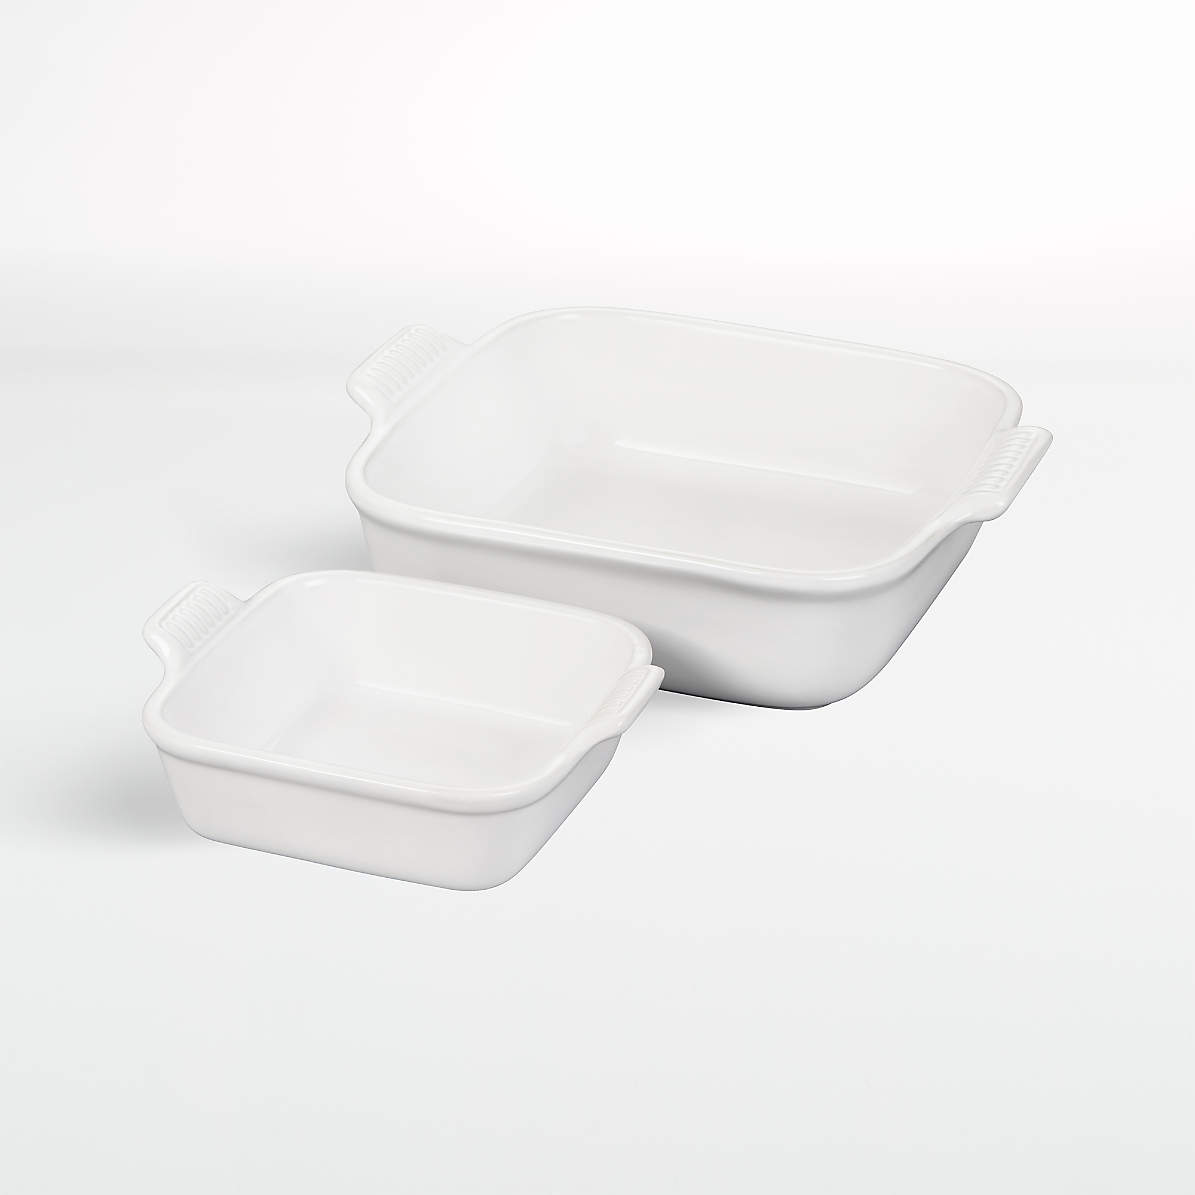 NEW White Le Creuset Stoneware Square 5.5 Inch Baking Dish 5 1/2 20 Ounce